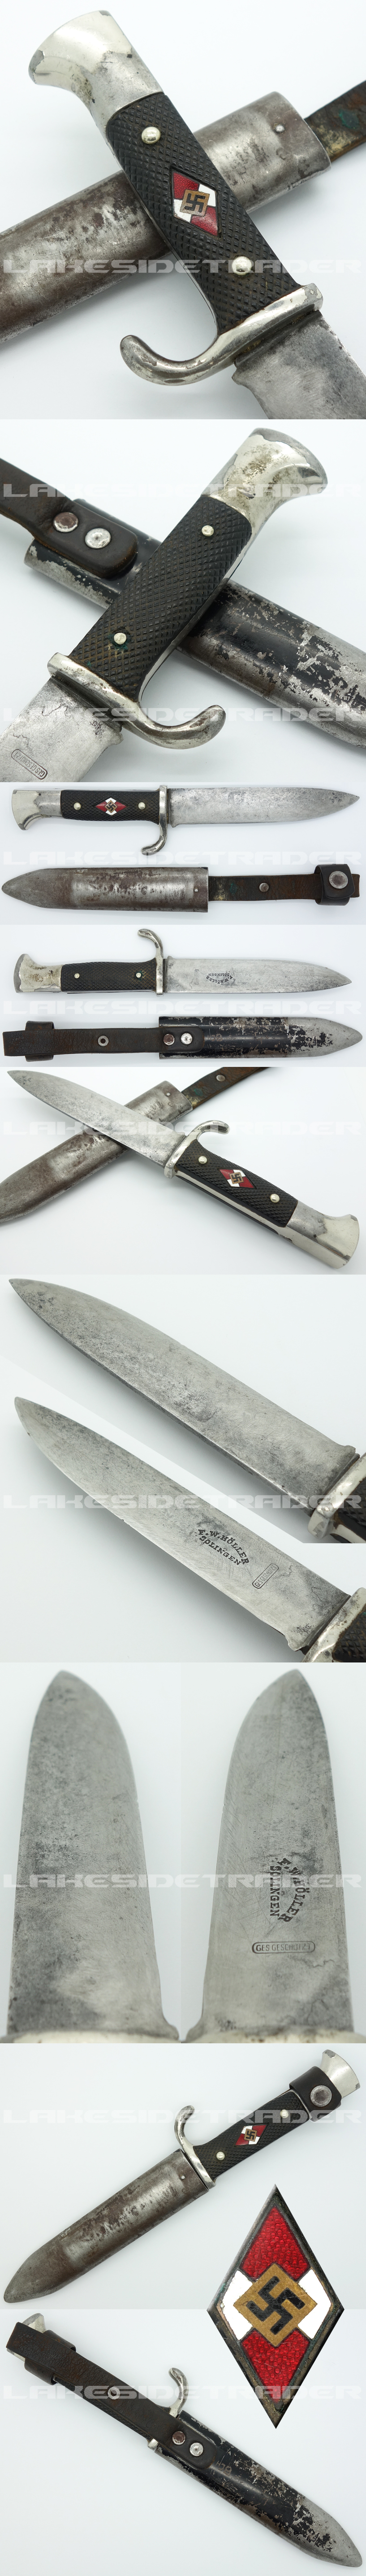 Early Hitler Youth Knife by F. W. H?ller